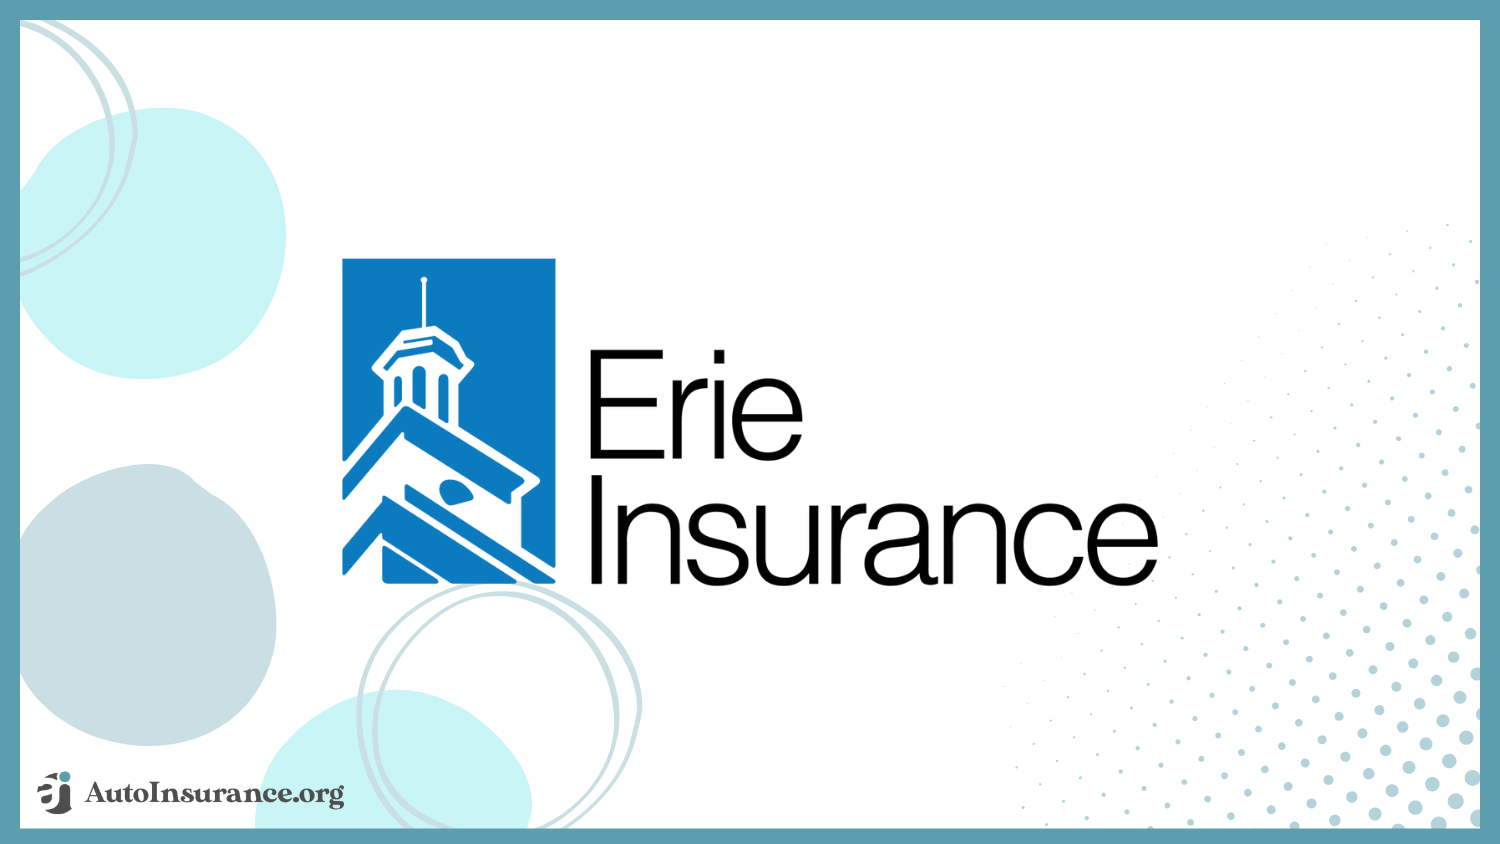 Erie: Best Auto Insurance for Drivers with Epilepsy